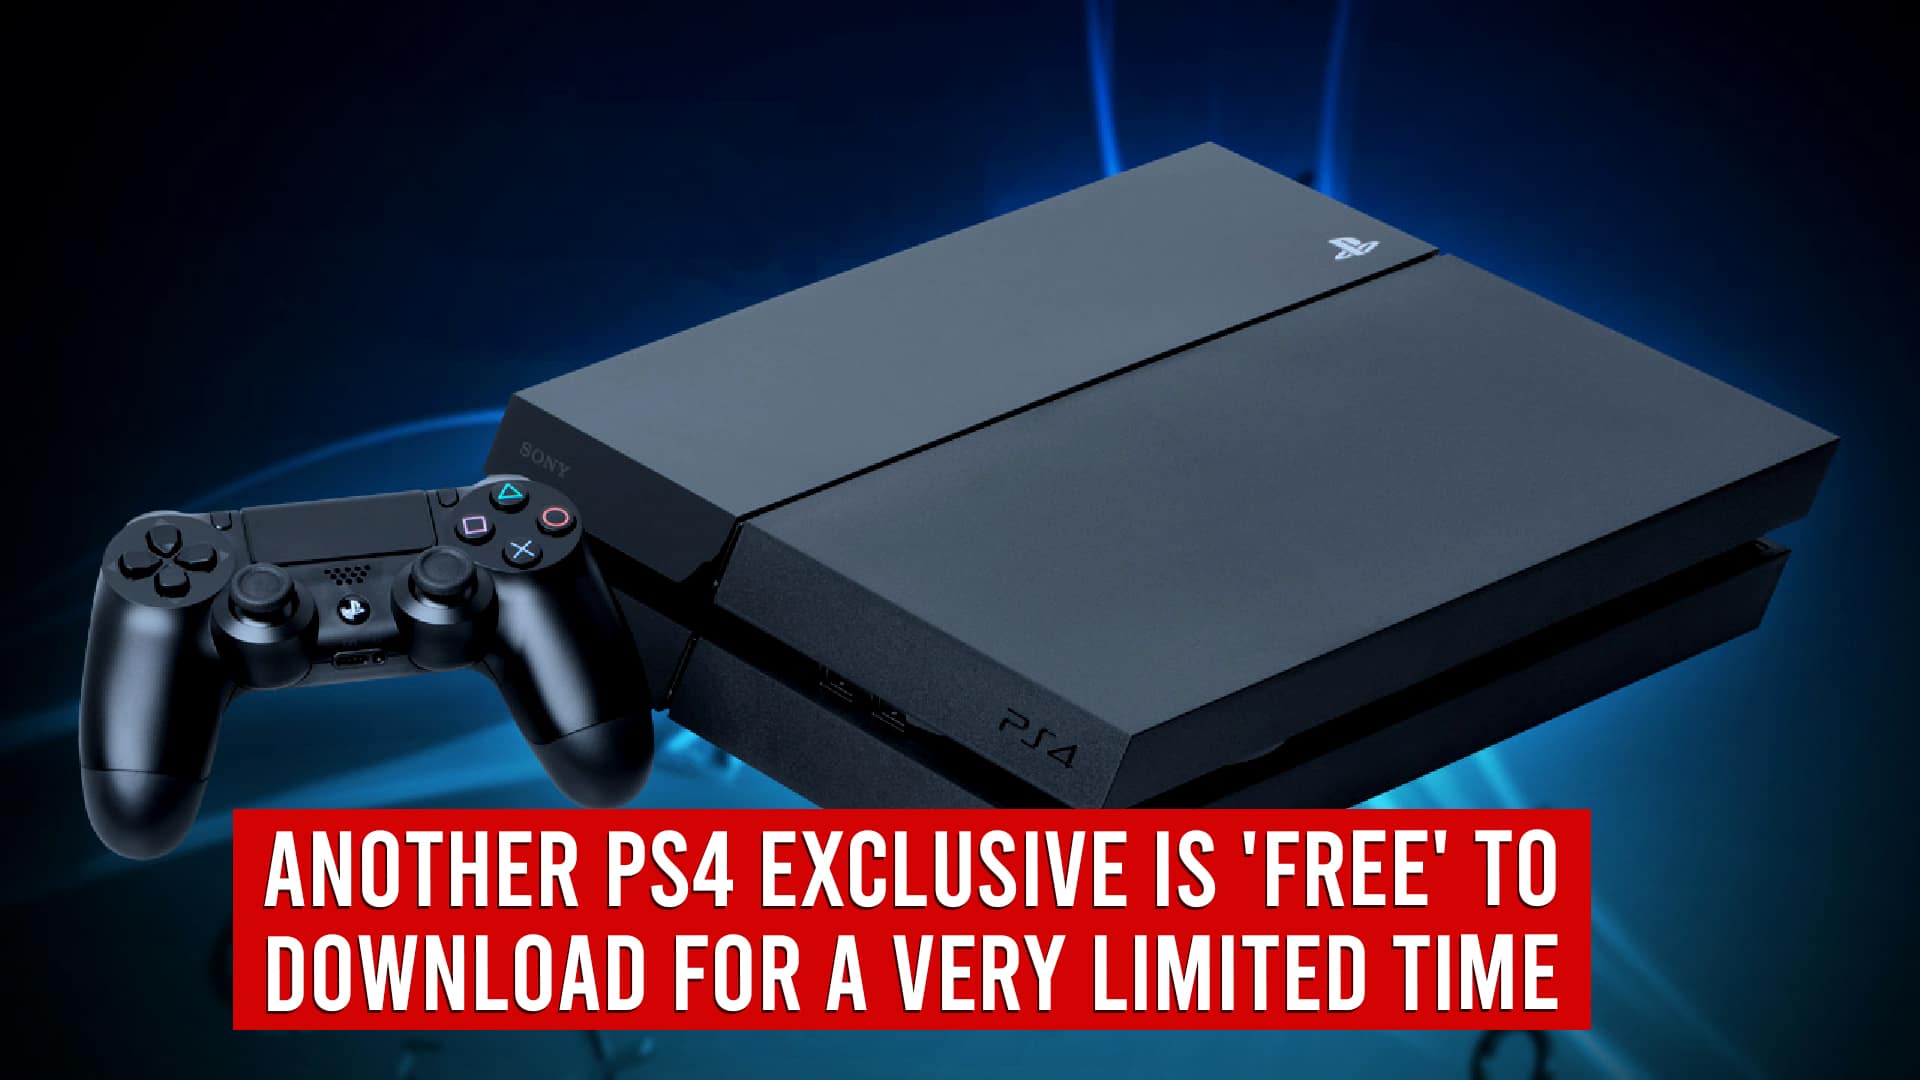 Another PS4 Exclusive Is ‘Free’ To Download For A Very Limited Time